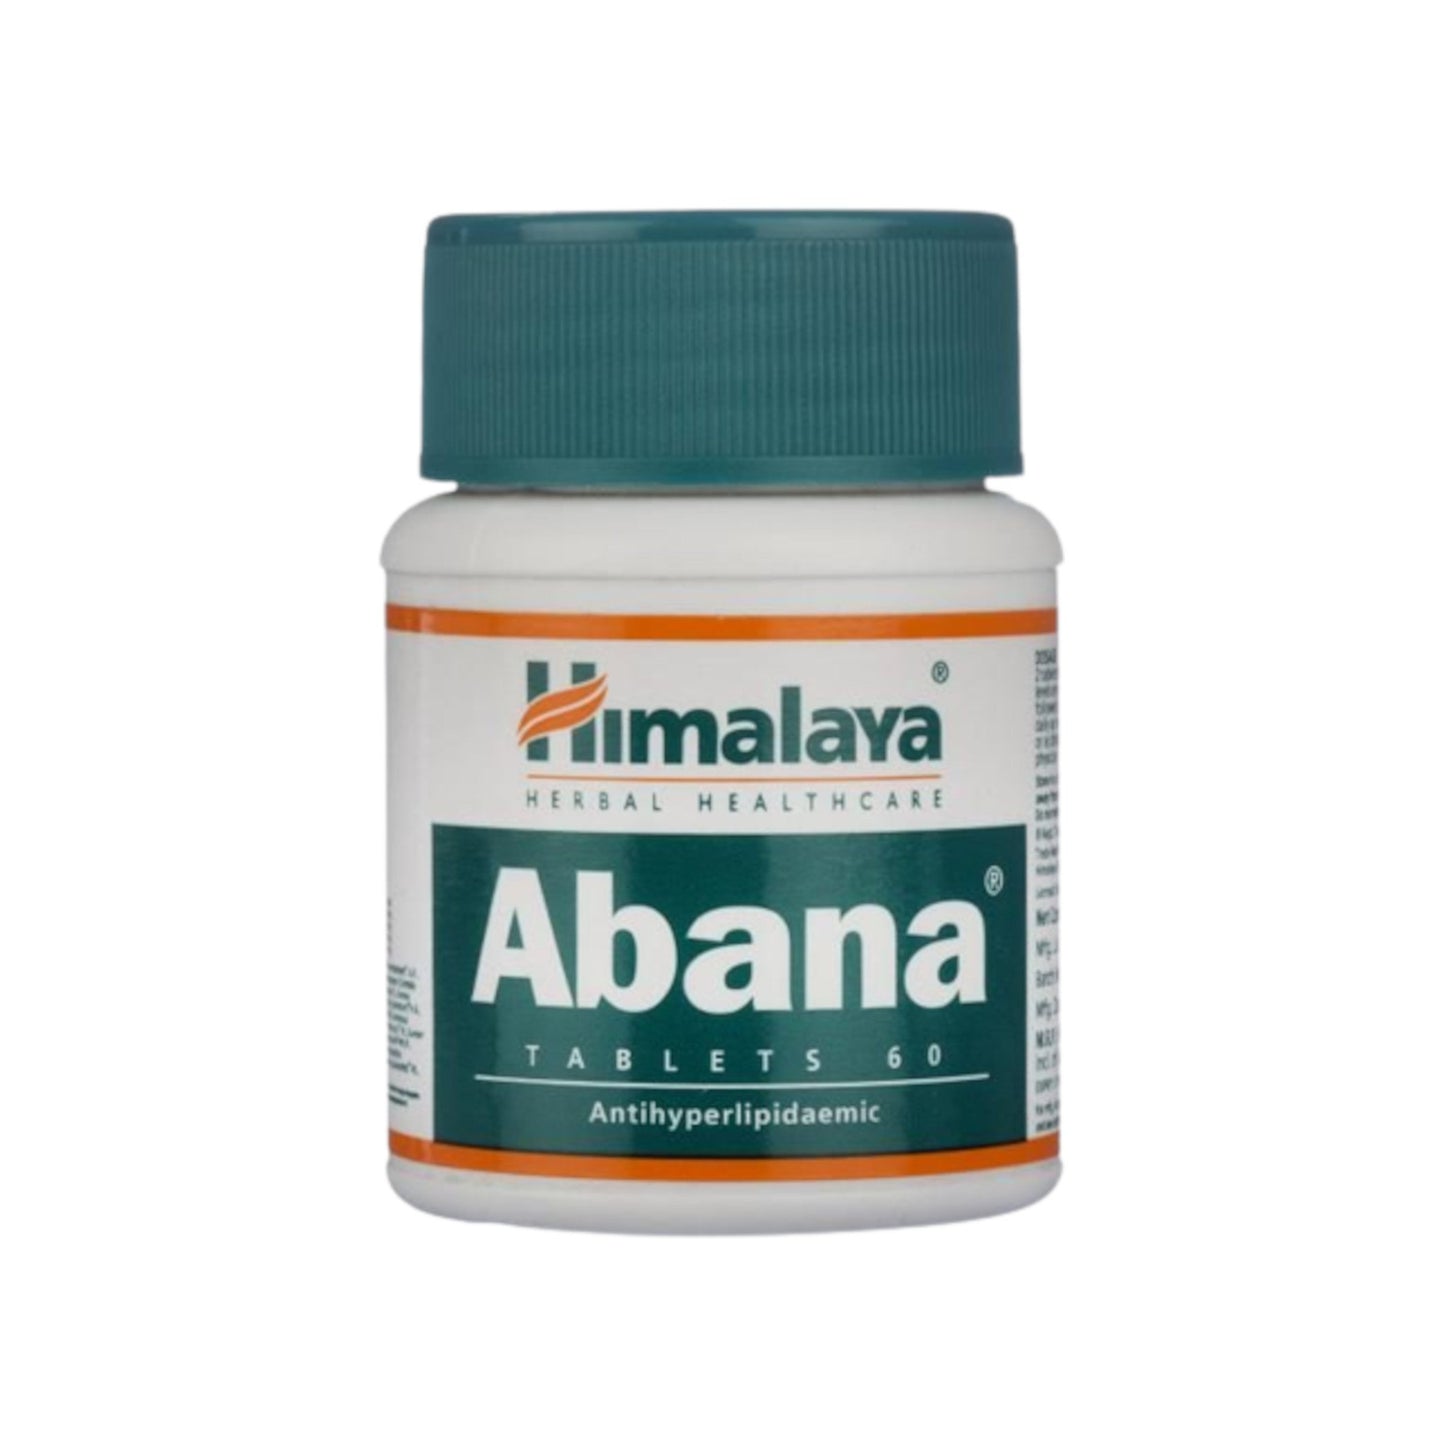 Image: Himalaya Abana 60 Tablets - Ayurvedic heart health support for blood pressure, cholesterol, and stress relief.